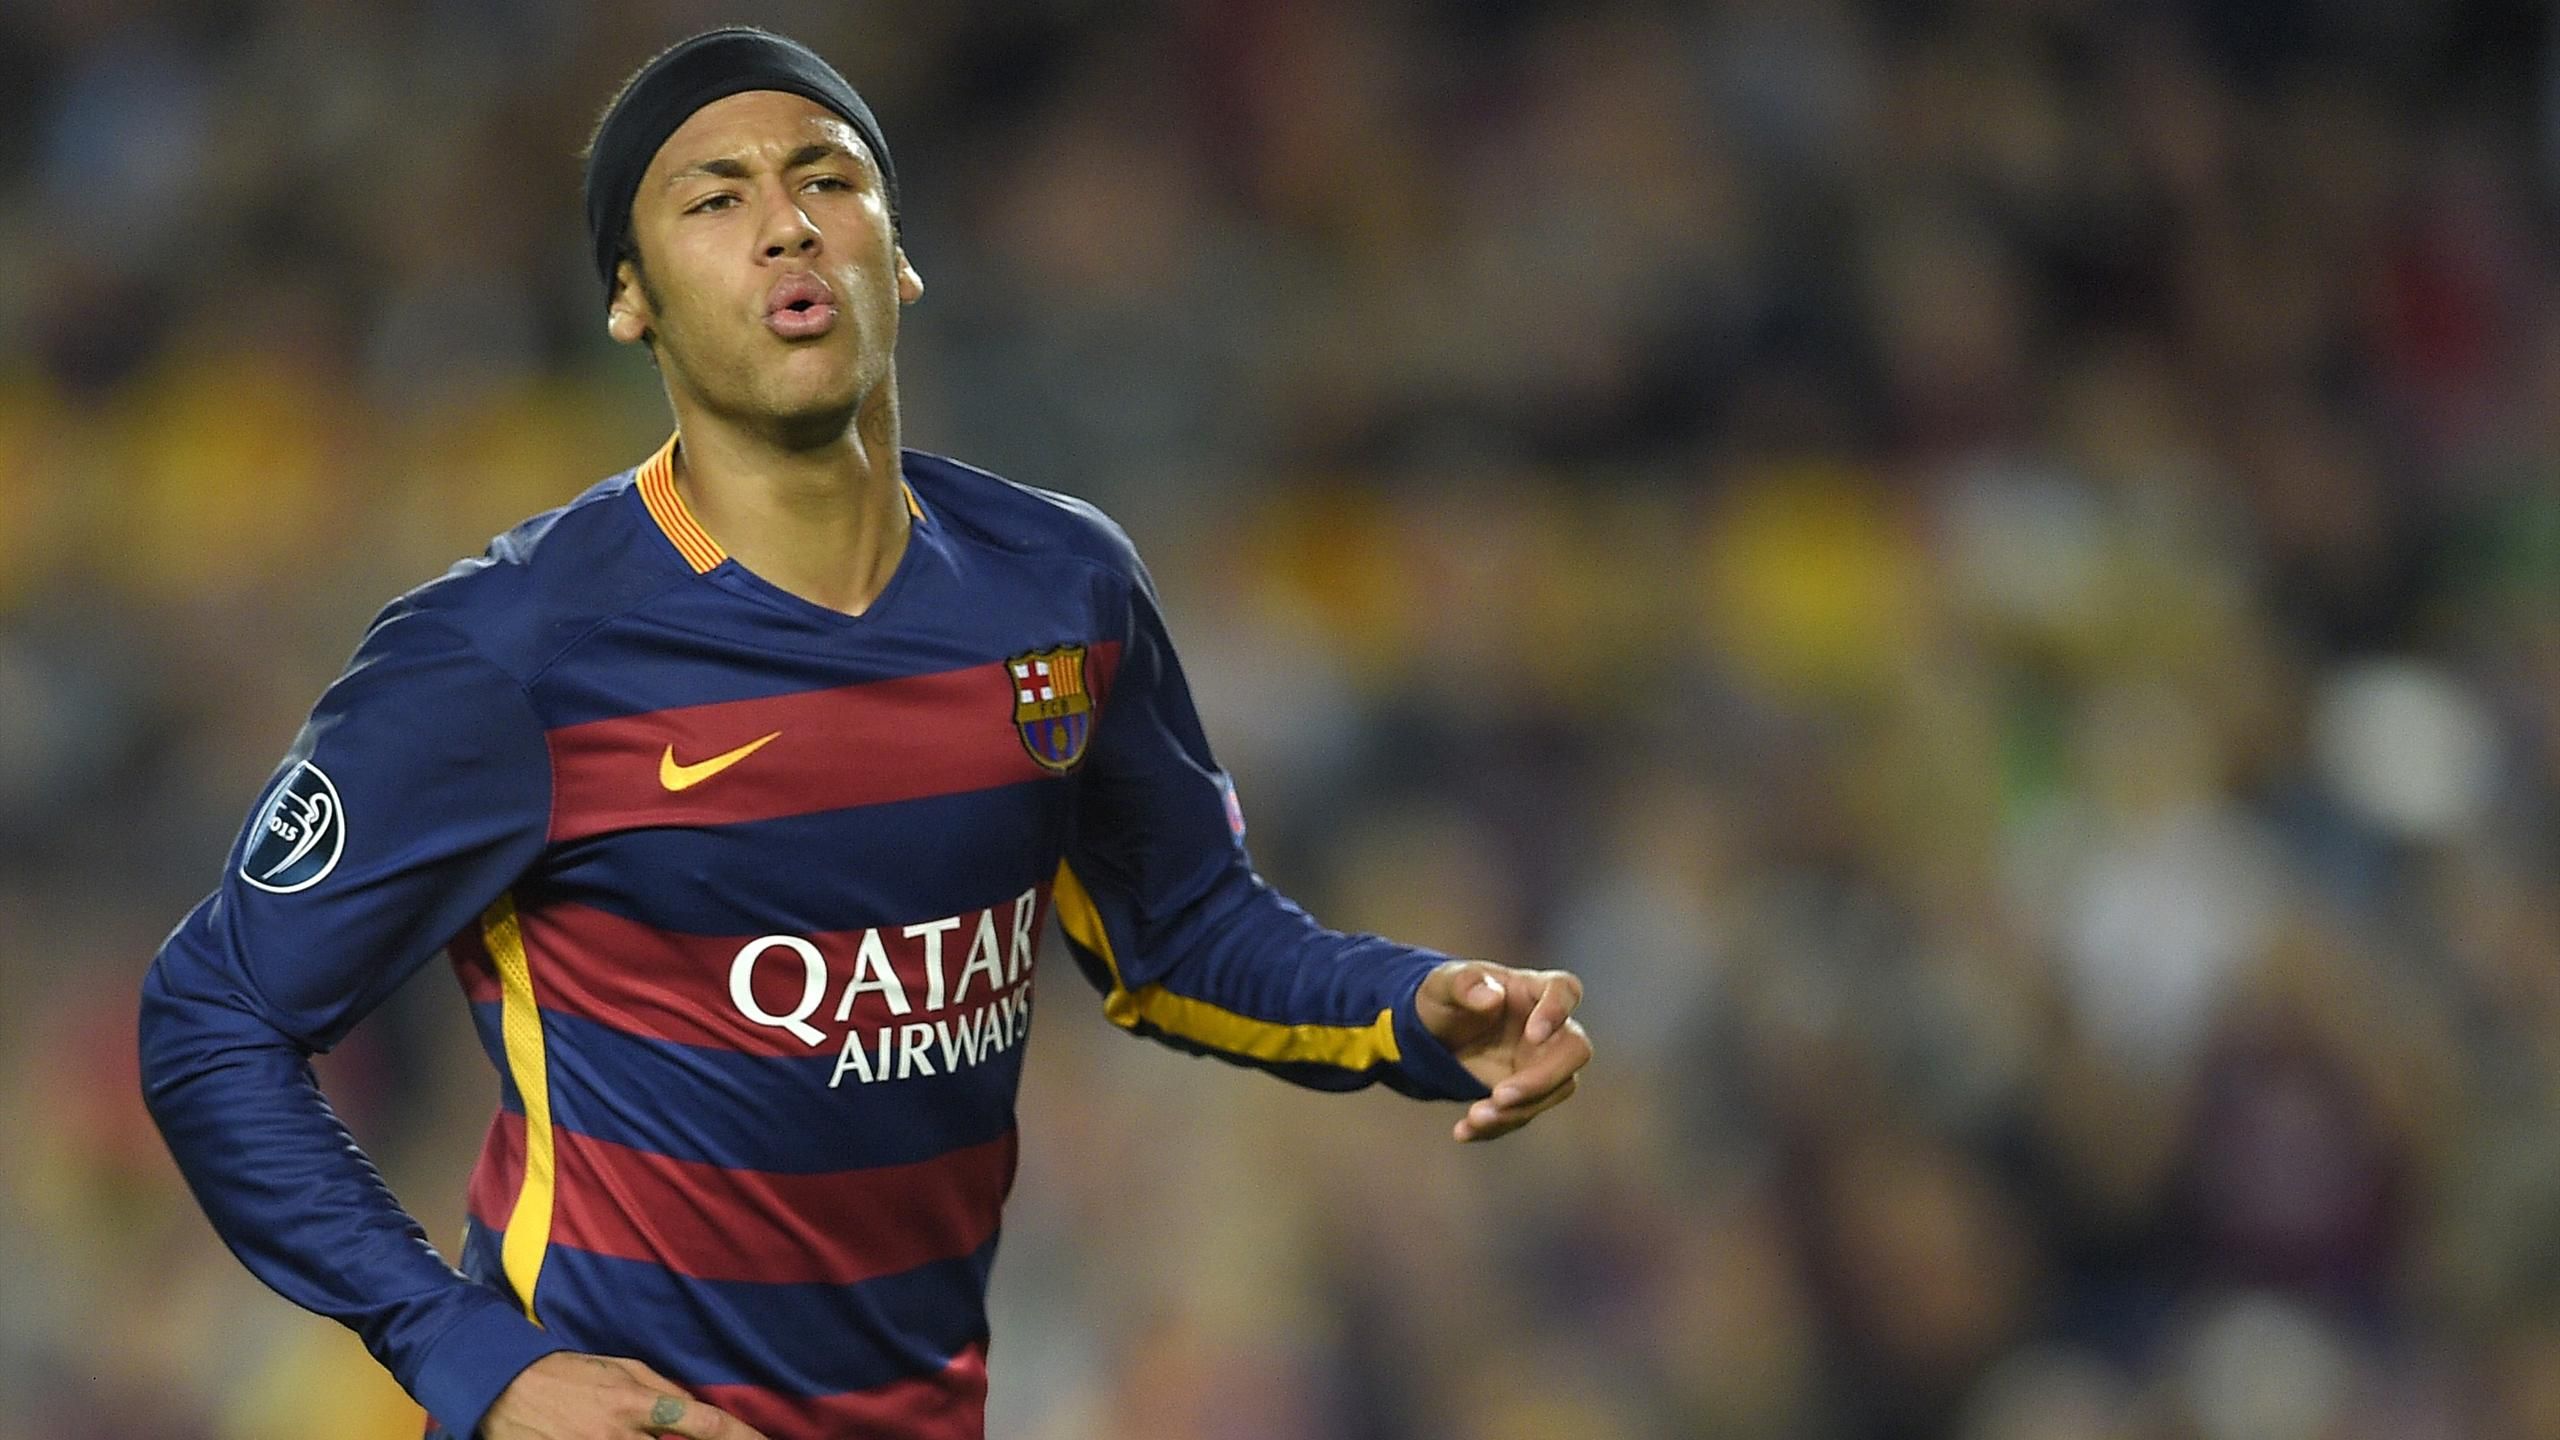 Lionel Messi set for Ballon d'Or but Neymar threatens the old duopoly, Ballon d'Or